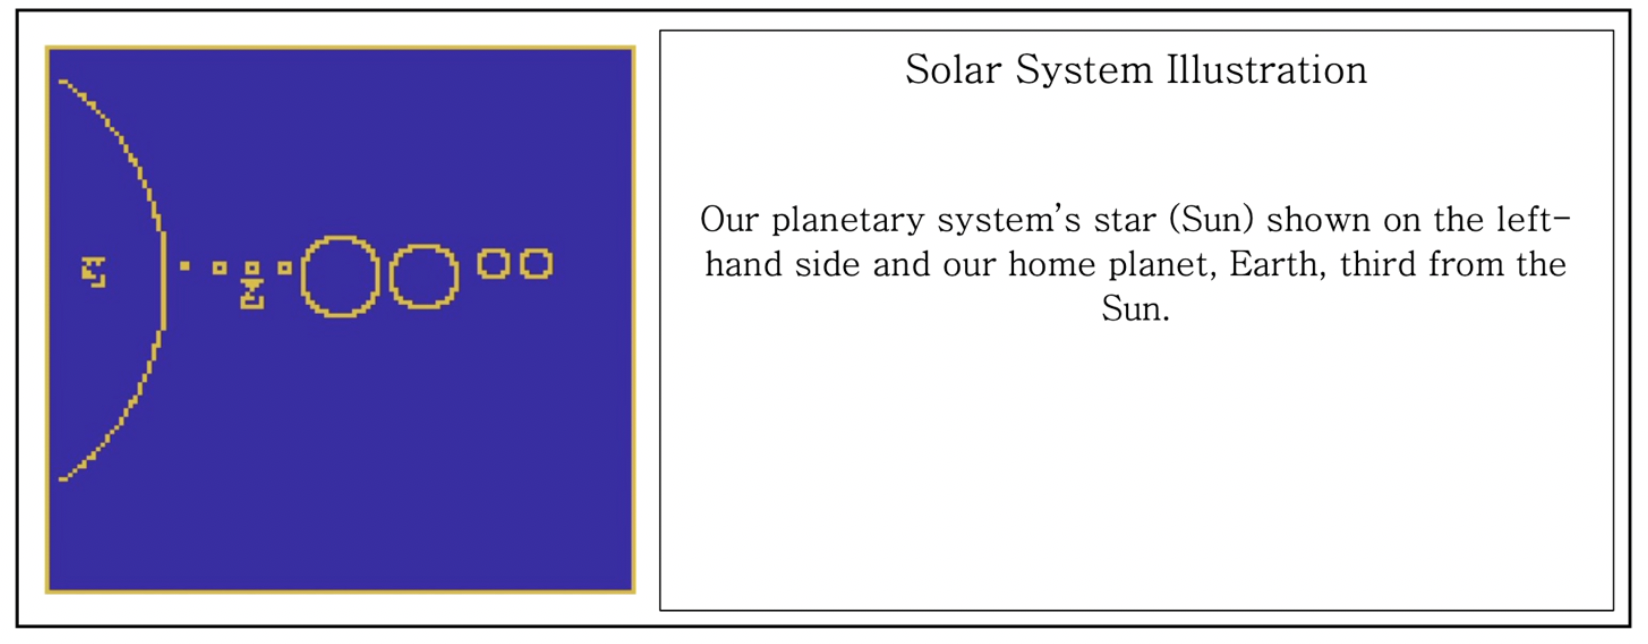 Earth's position in the solar system.  (Image: J. H. Jiang et al., 2022)